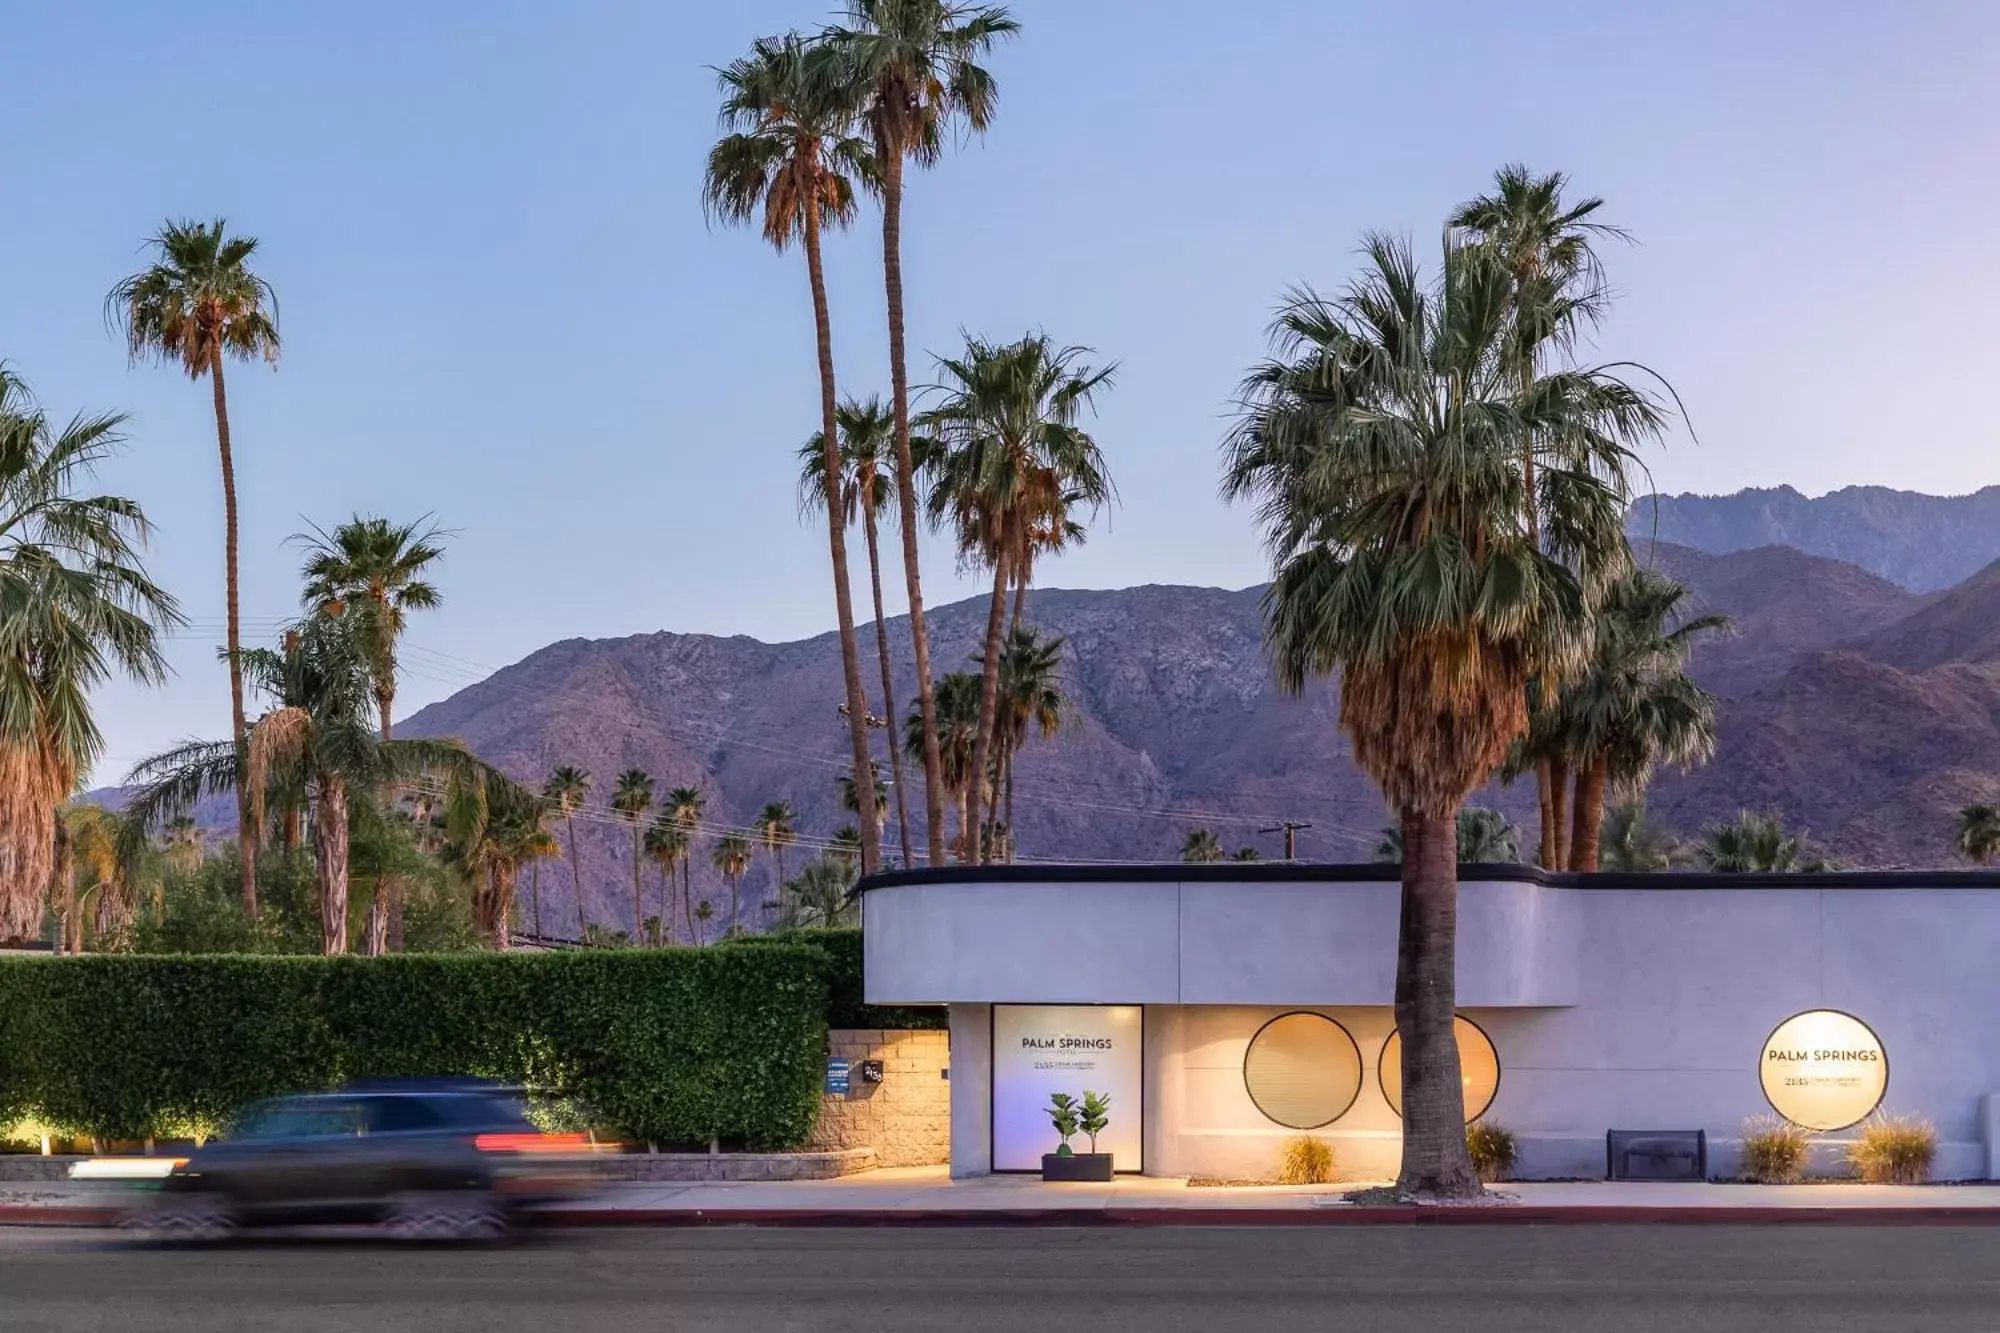 Property building in The Palm Springs Hotel